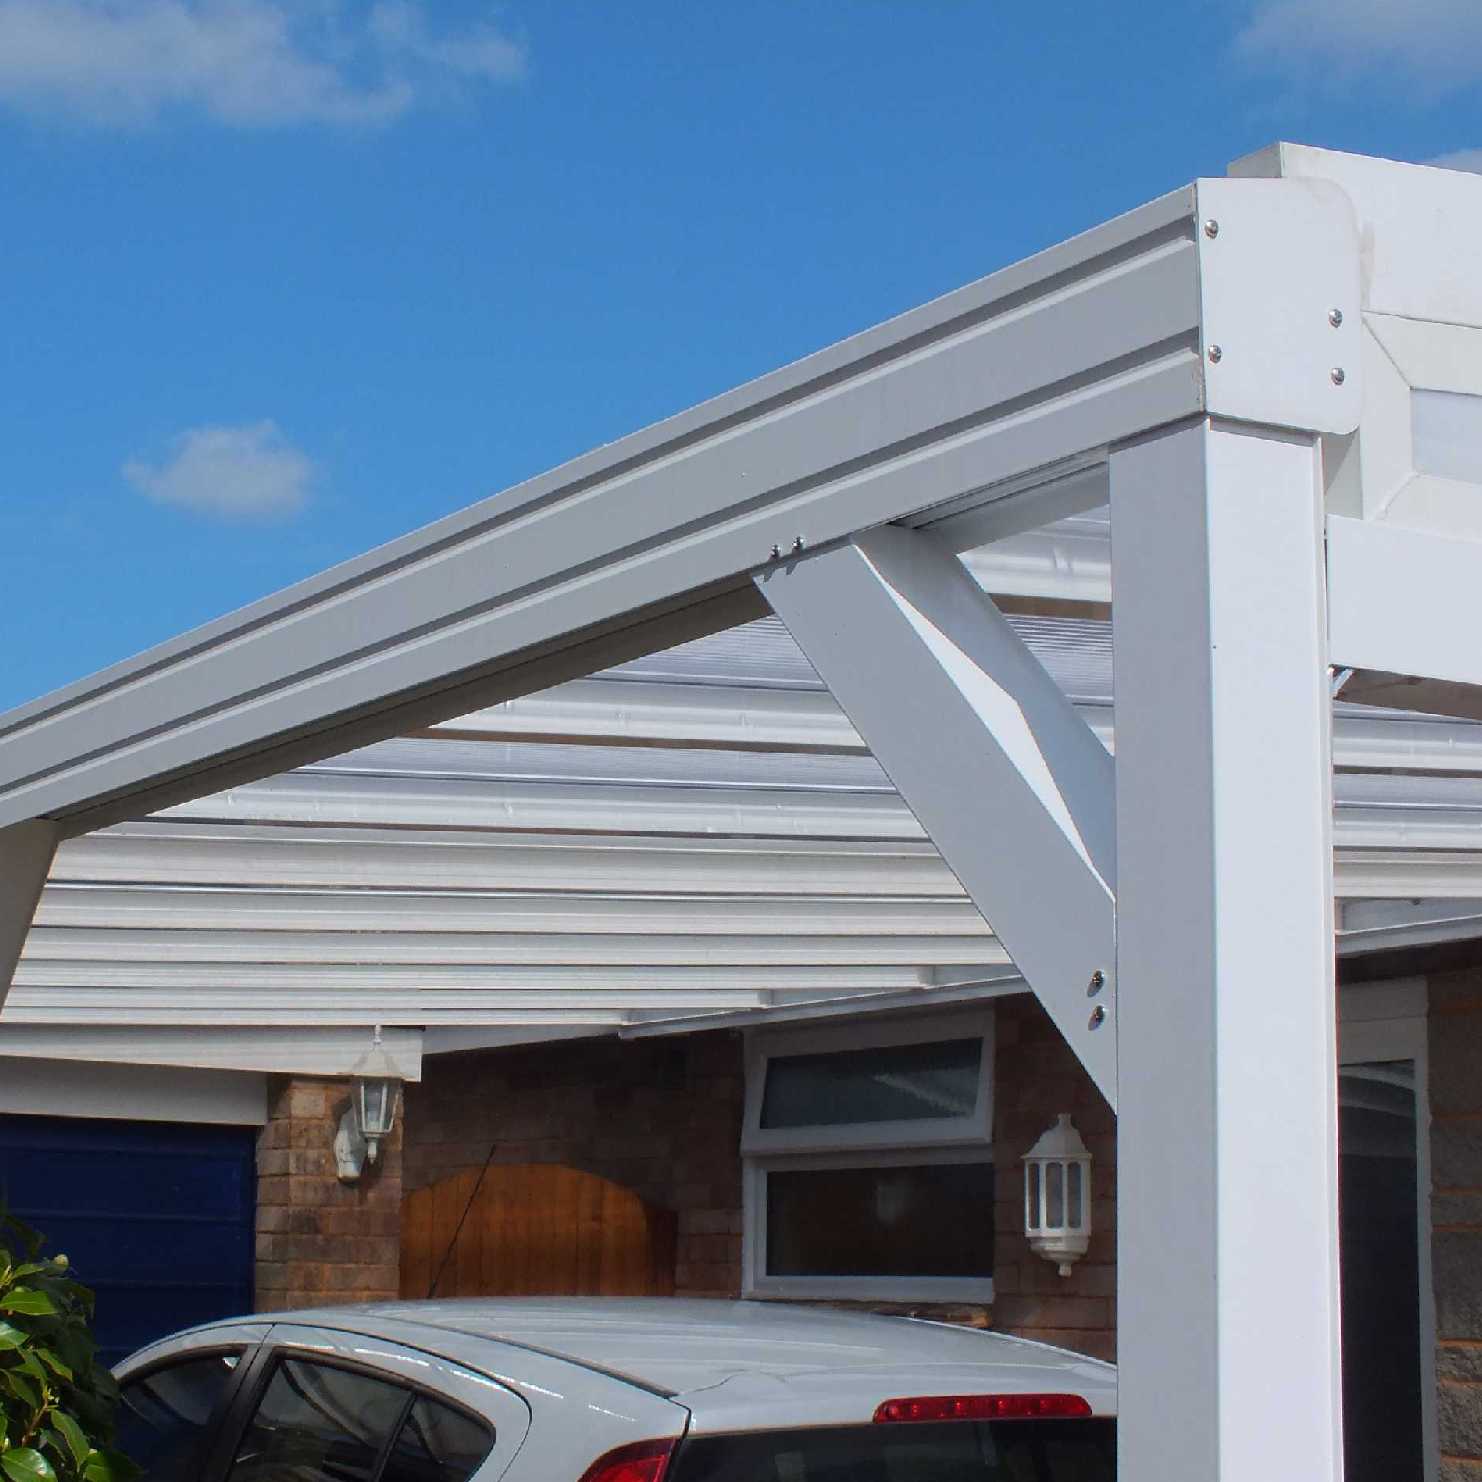 Great deals on Omega Smart Lean-To Canopy, White with 16mm Polycarbonate Glazing - 8.4m (W) x 3.5m (P), (4) Supporting Posts